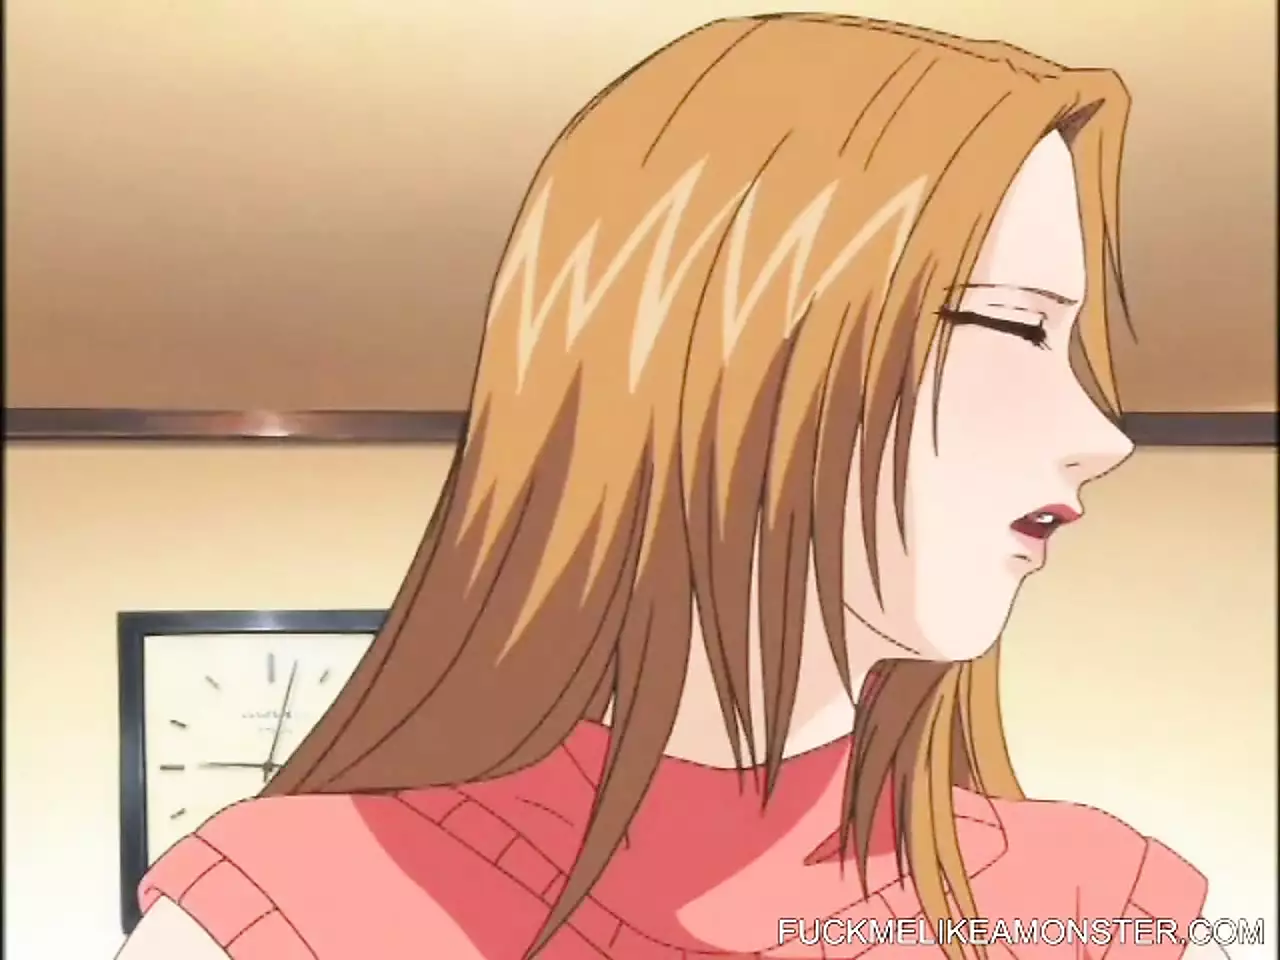 Horny anime teens fucking in all positions Xxx Pic Hd